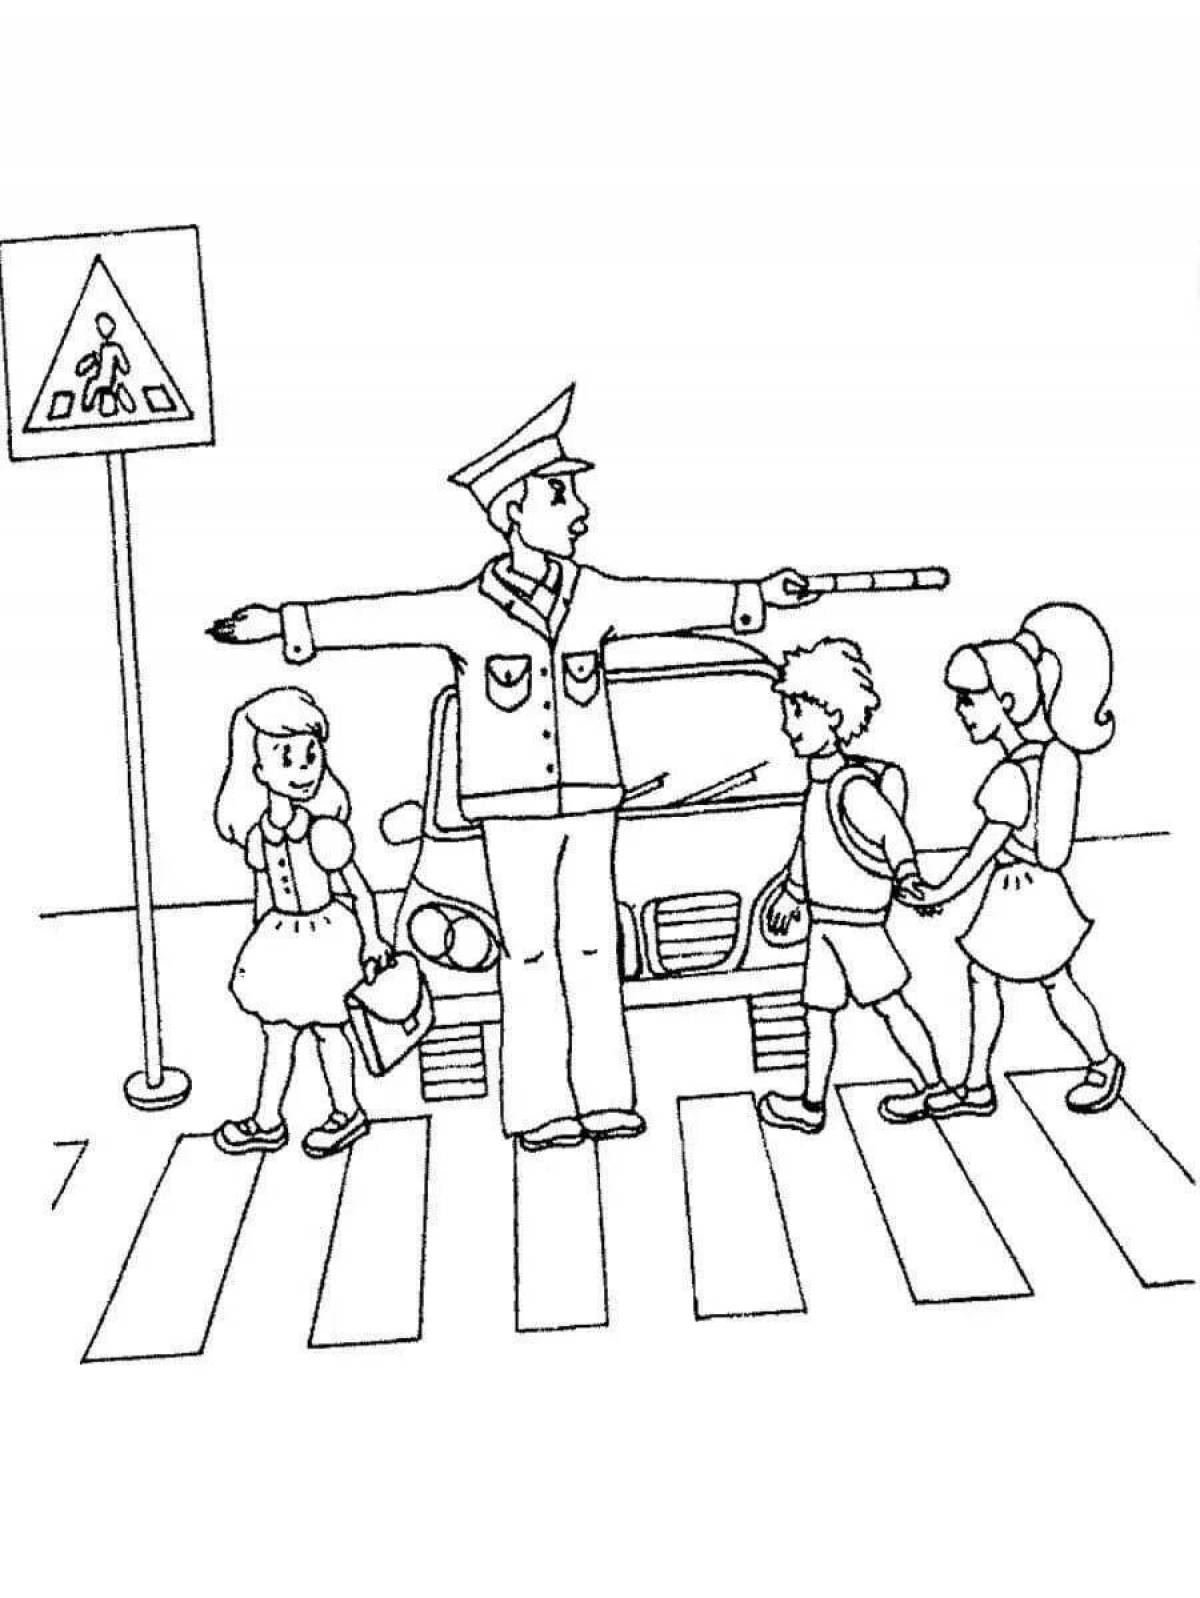 Bright coloring traffic rules for class 1